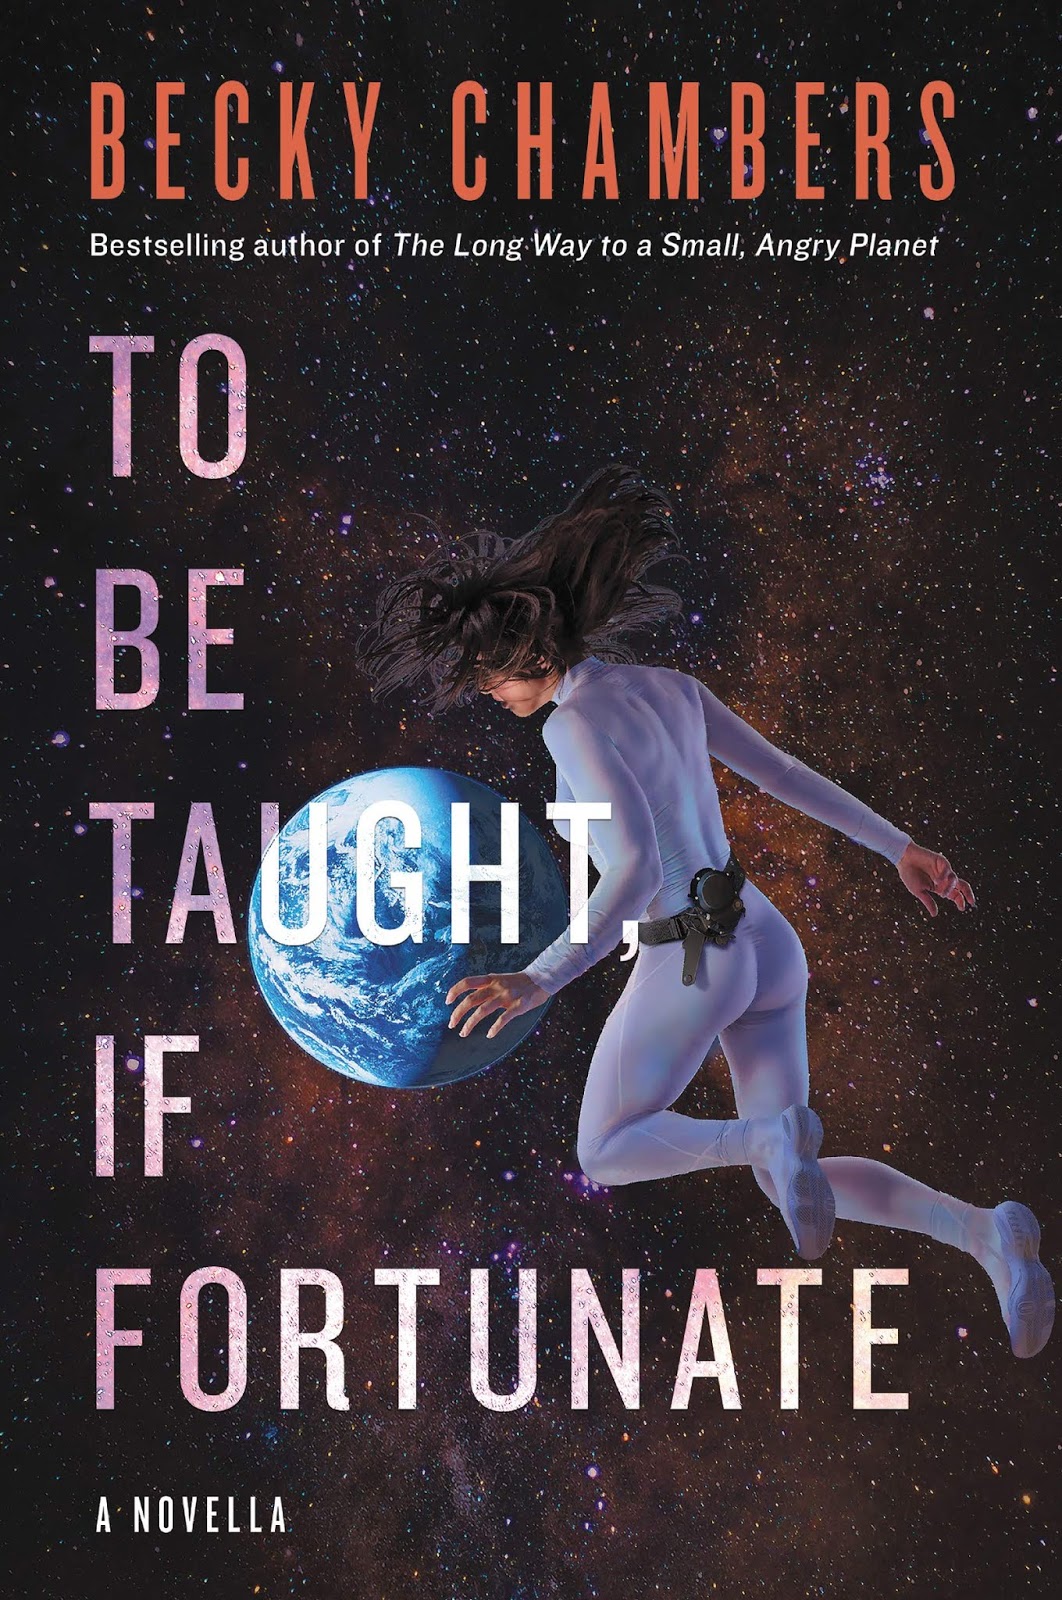 A person in a white unitard with a black belt floating in space looking down on a blue planet.